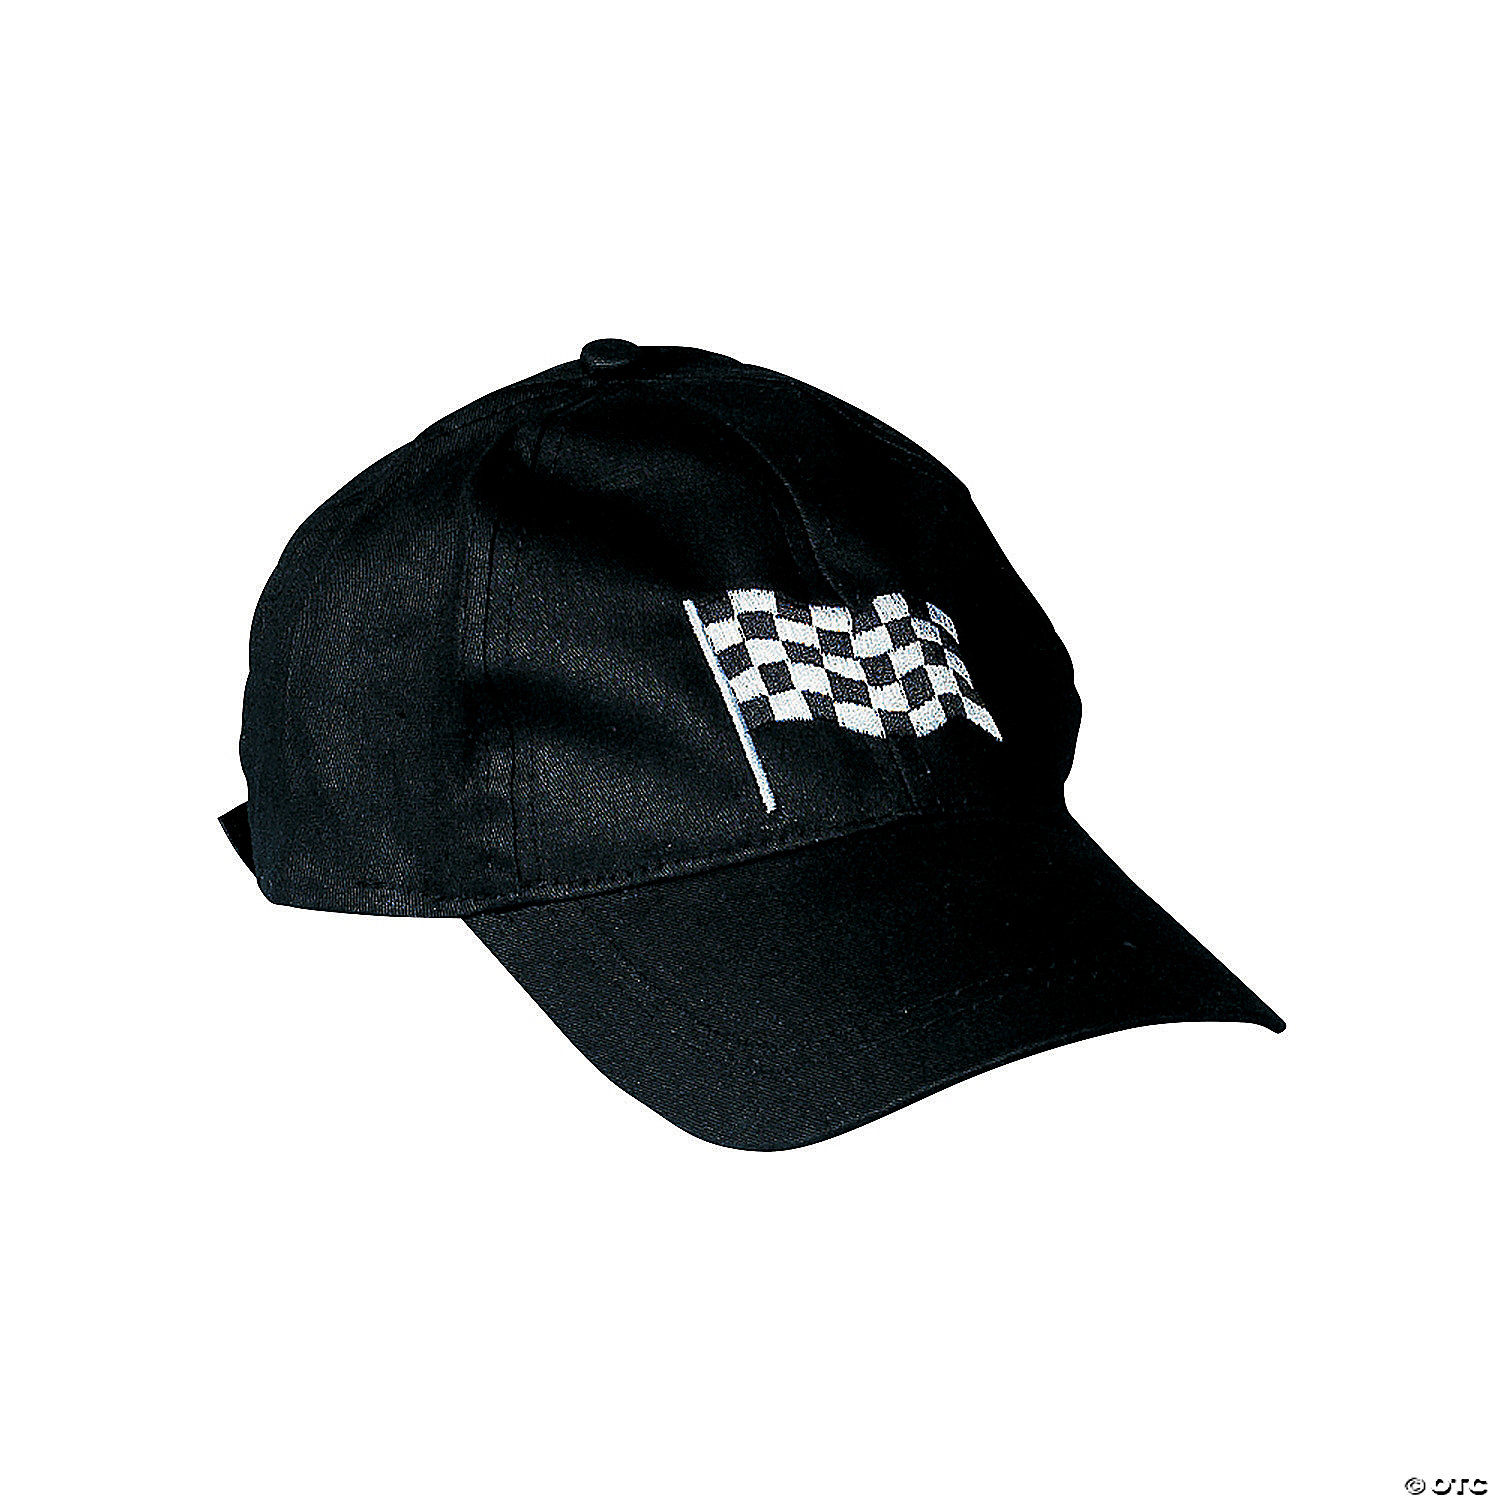 Race Checkered Racing Flag Classic Adjustable Cotton Baseball Caps Trucker Driver Hat Outdoor Cap White 